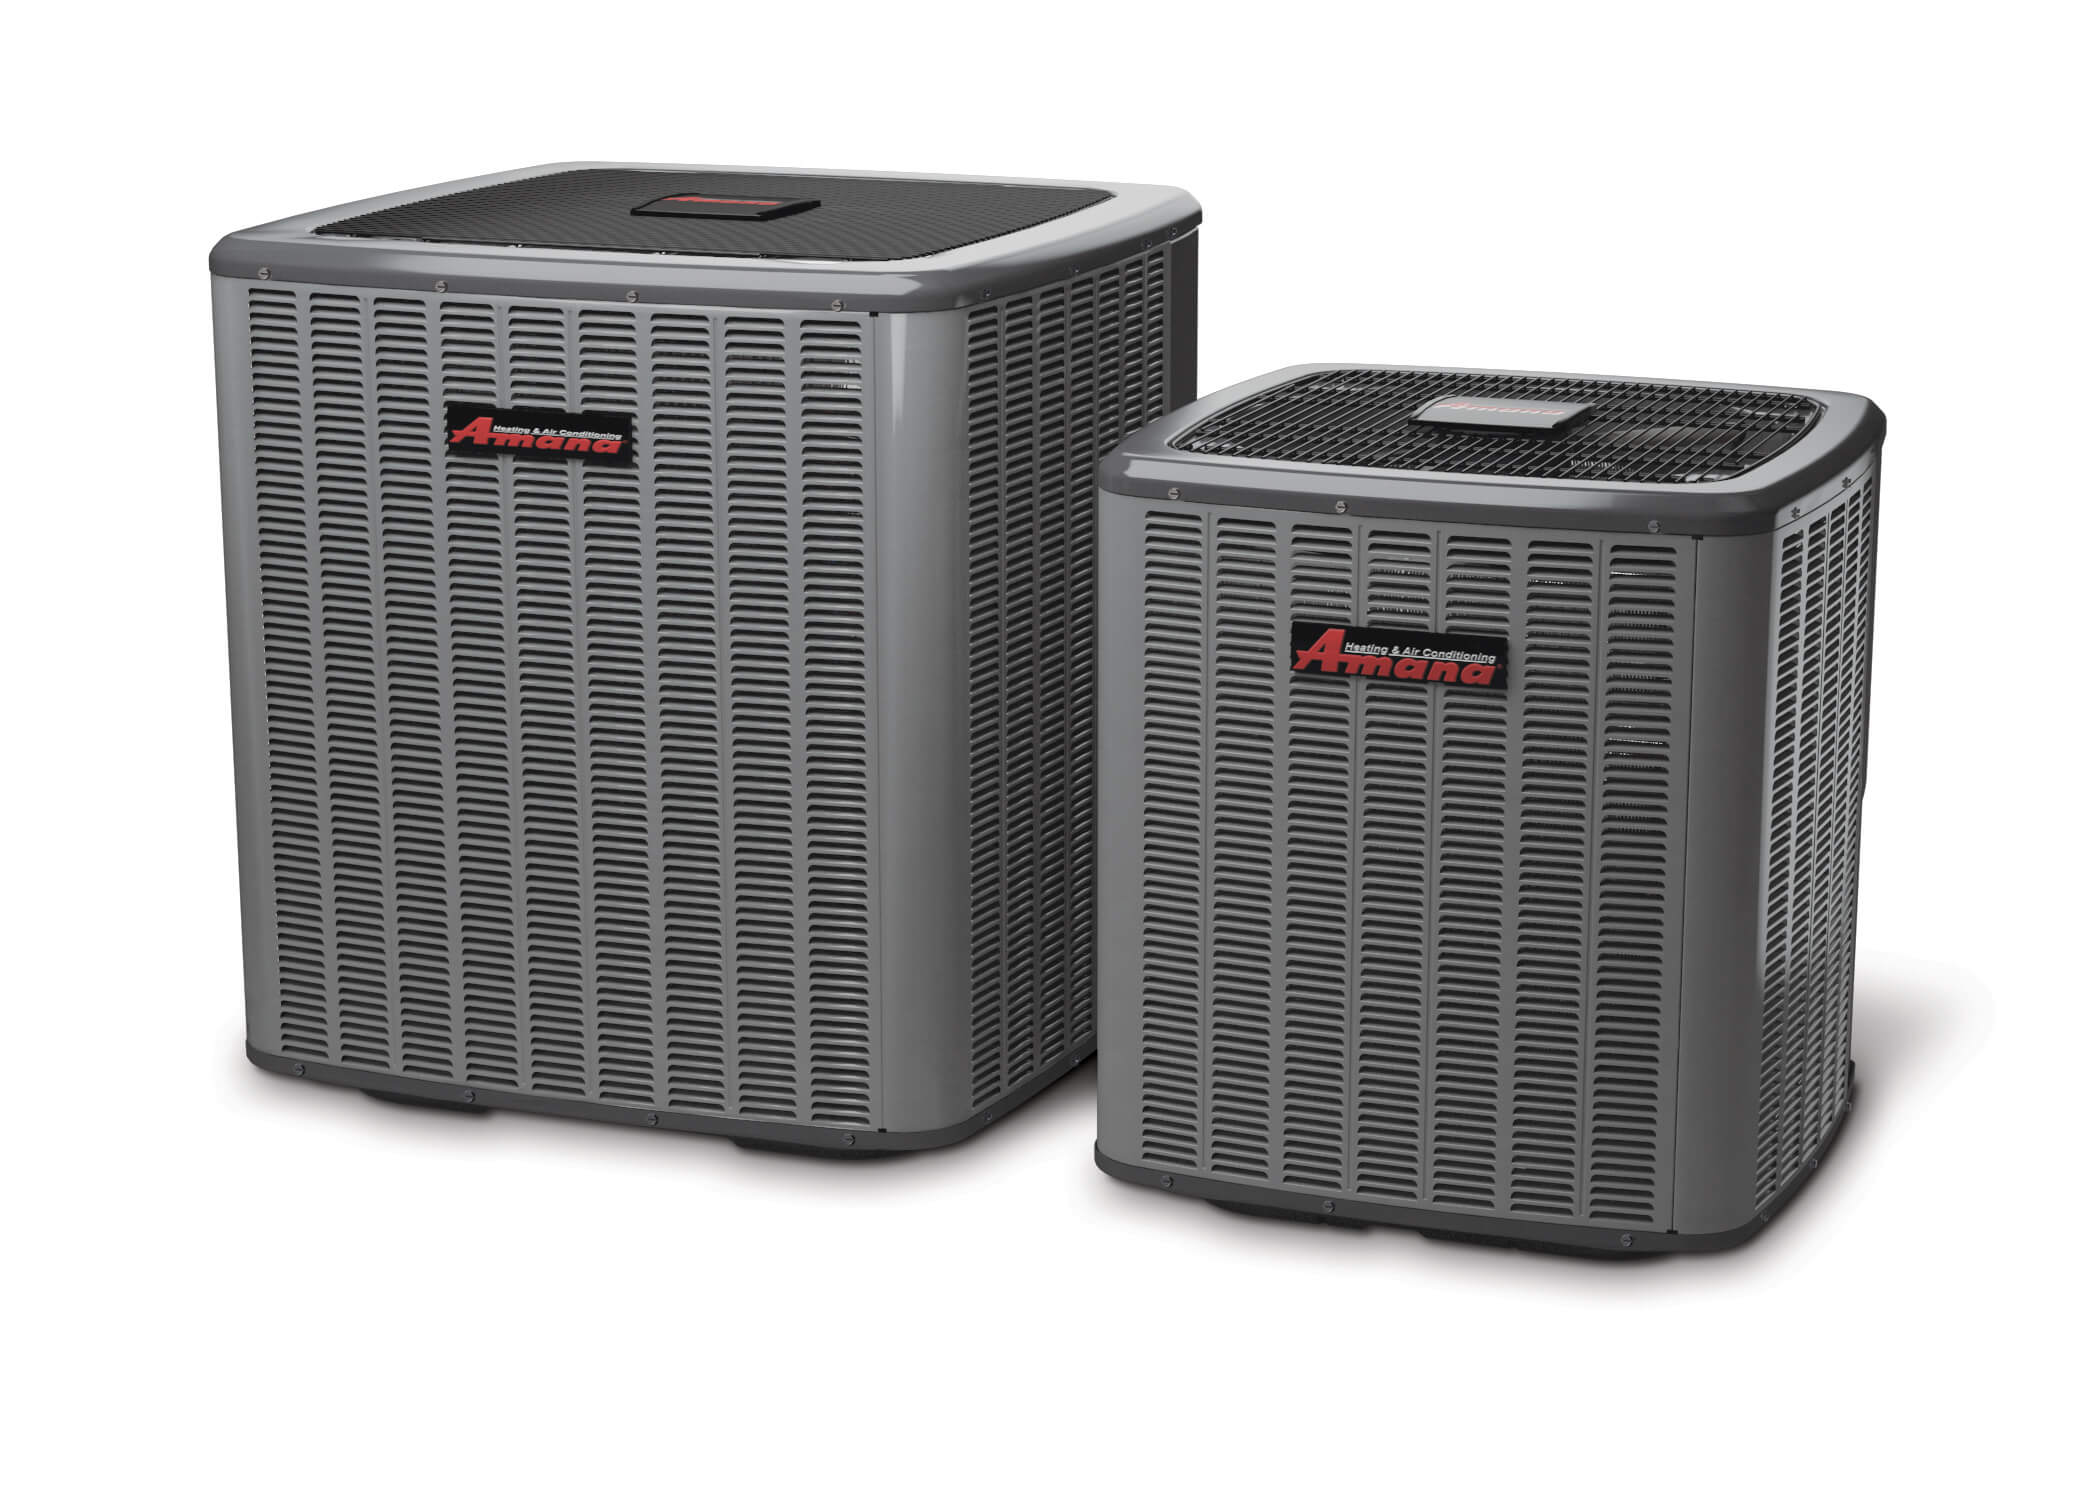 We offer 24/7 emergency Air Conditioning repair service in Plainfield IL.